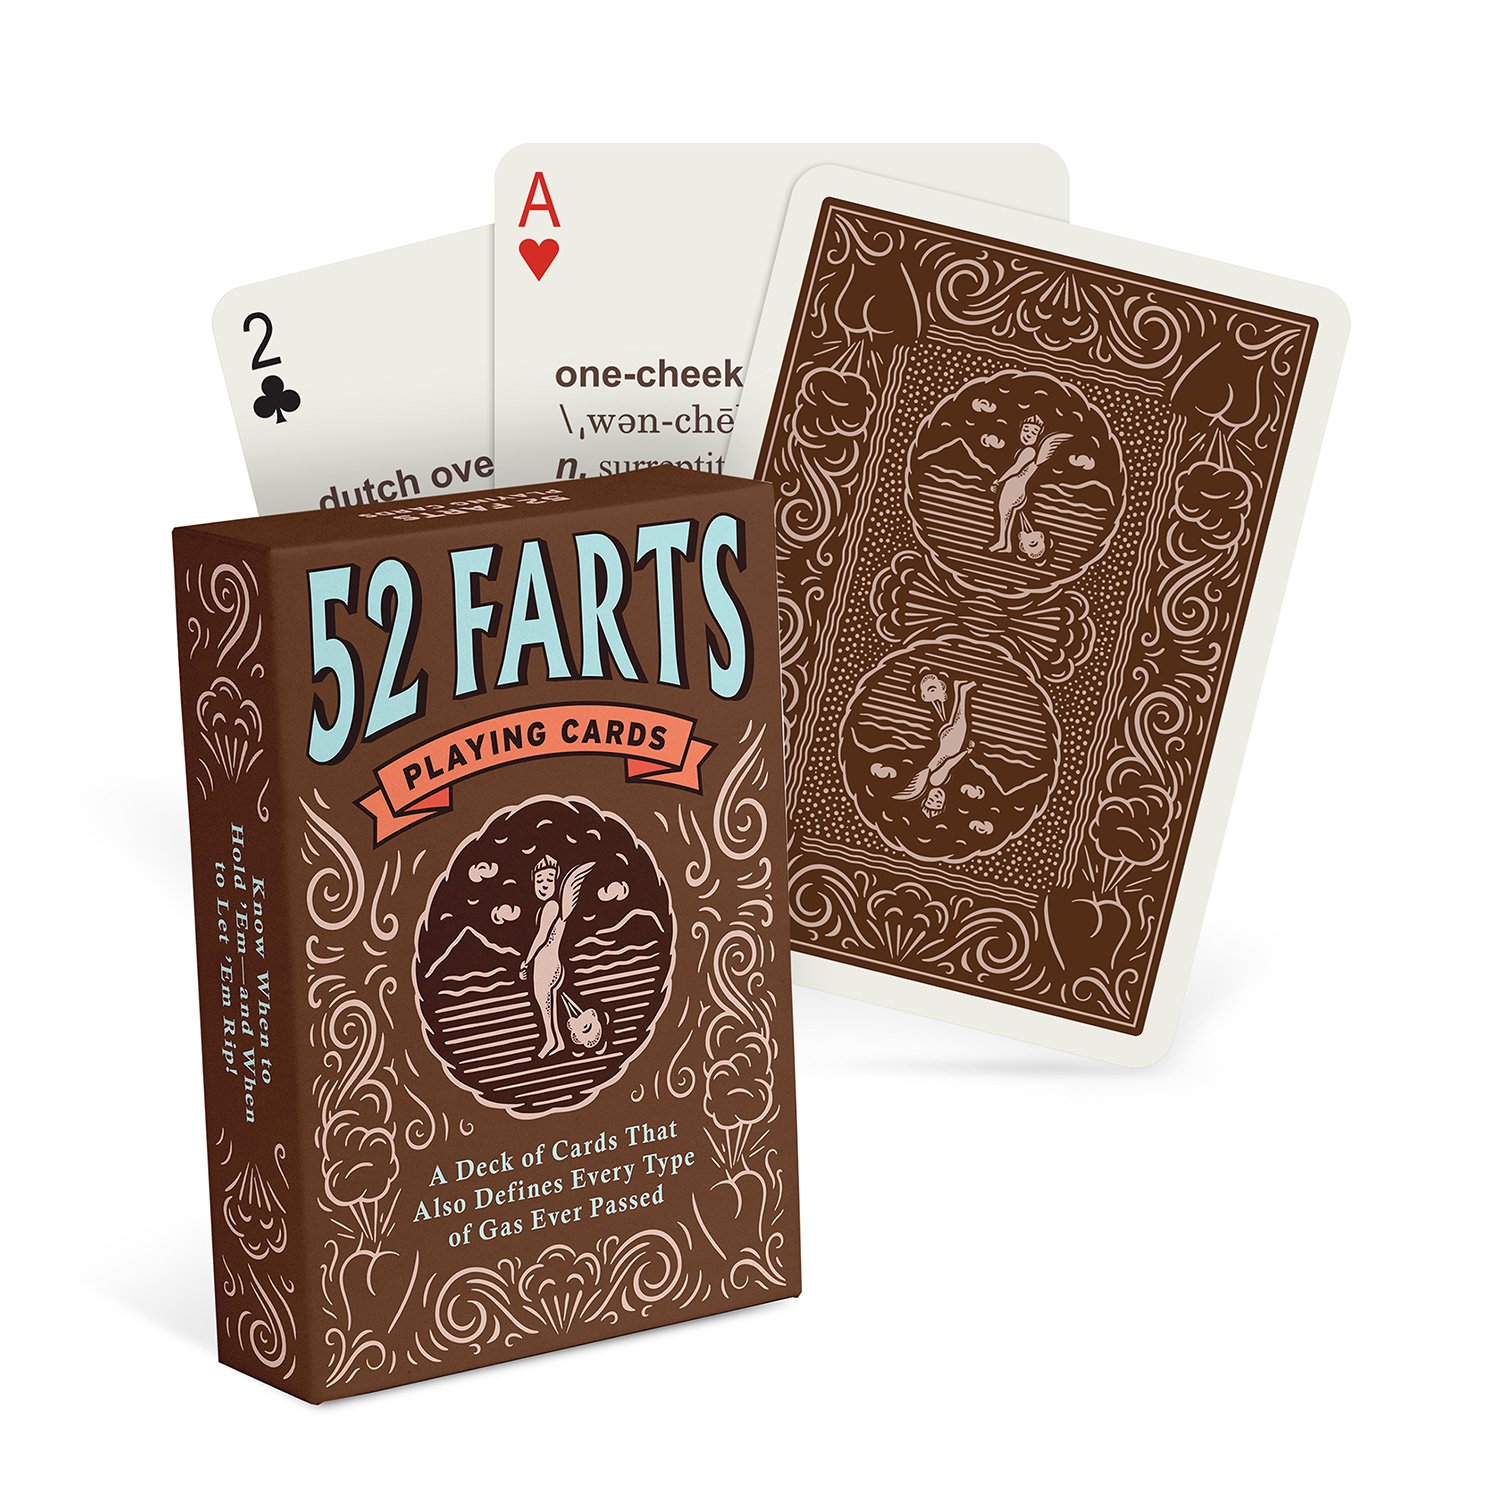 Knock Knock 52 Farts Playing Cards